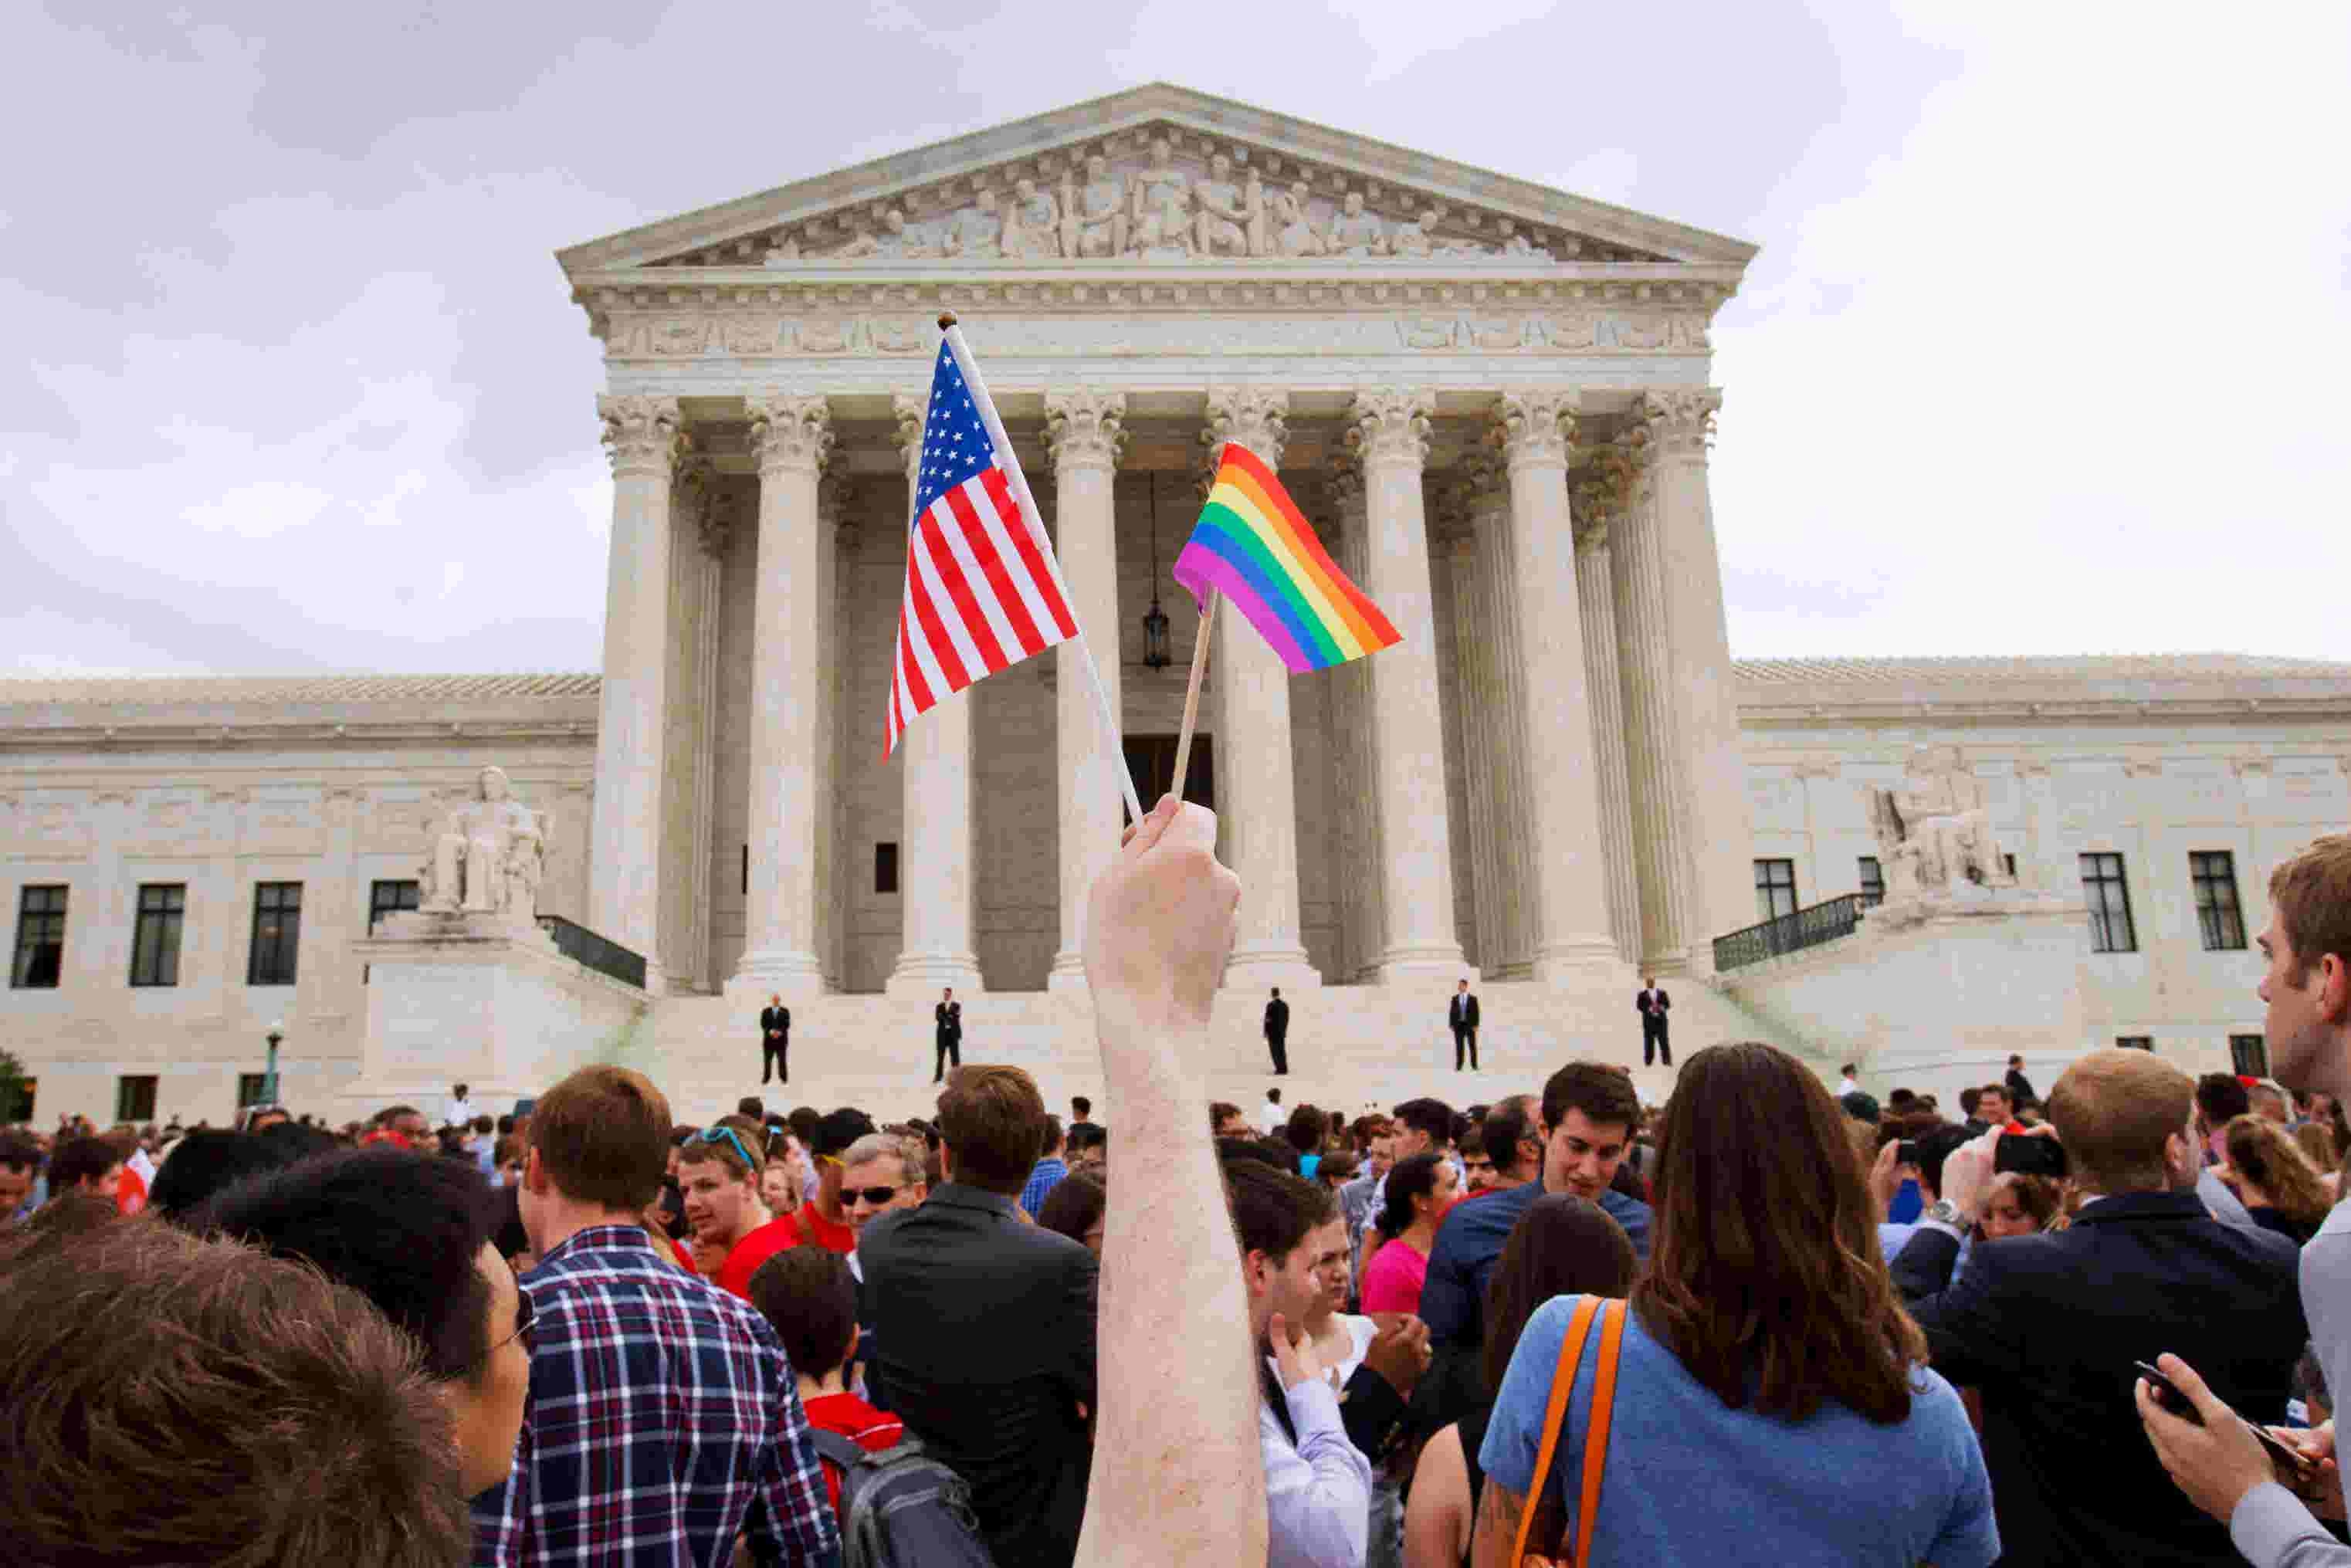 America is about to have a huge test on LGBTQ civil rights, discrimination